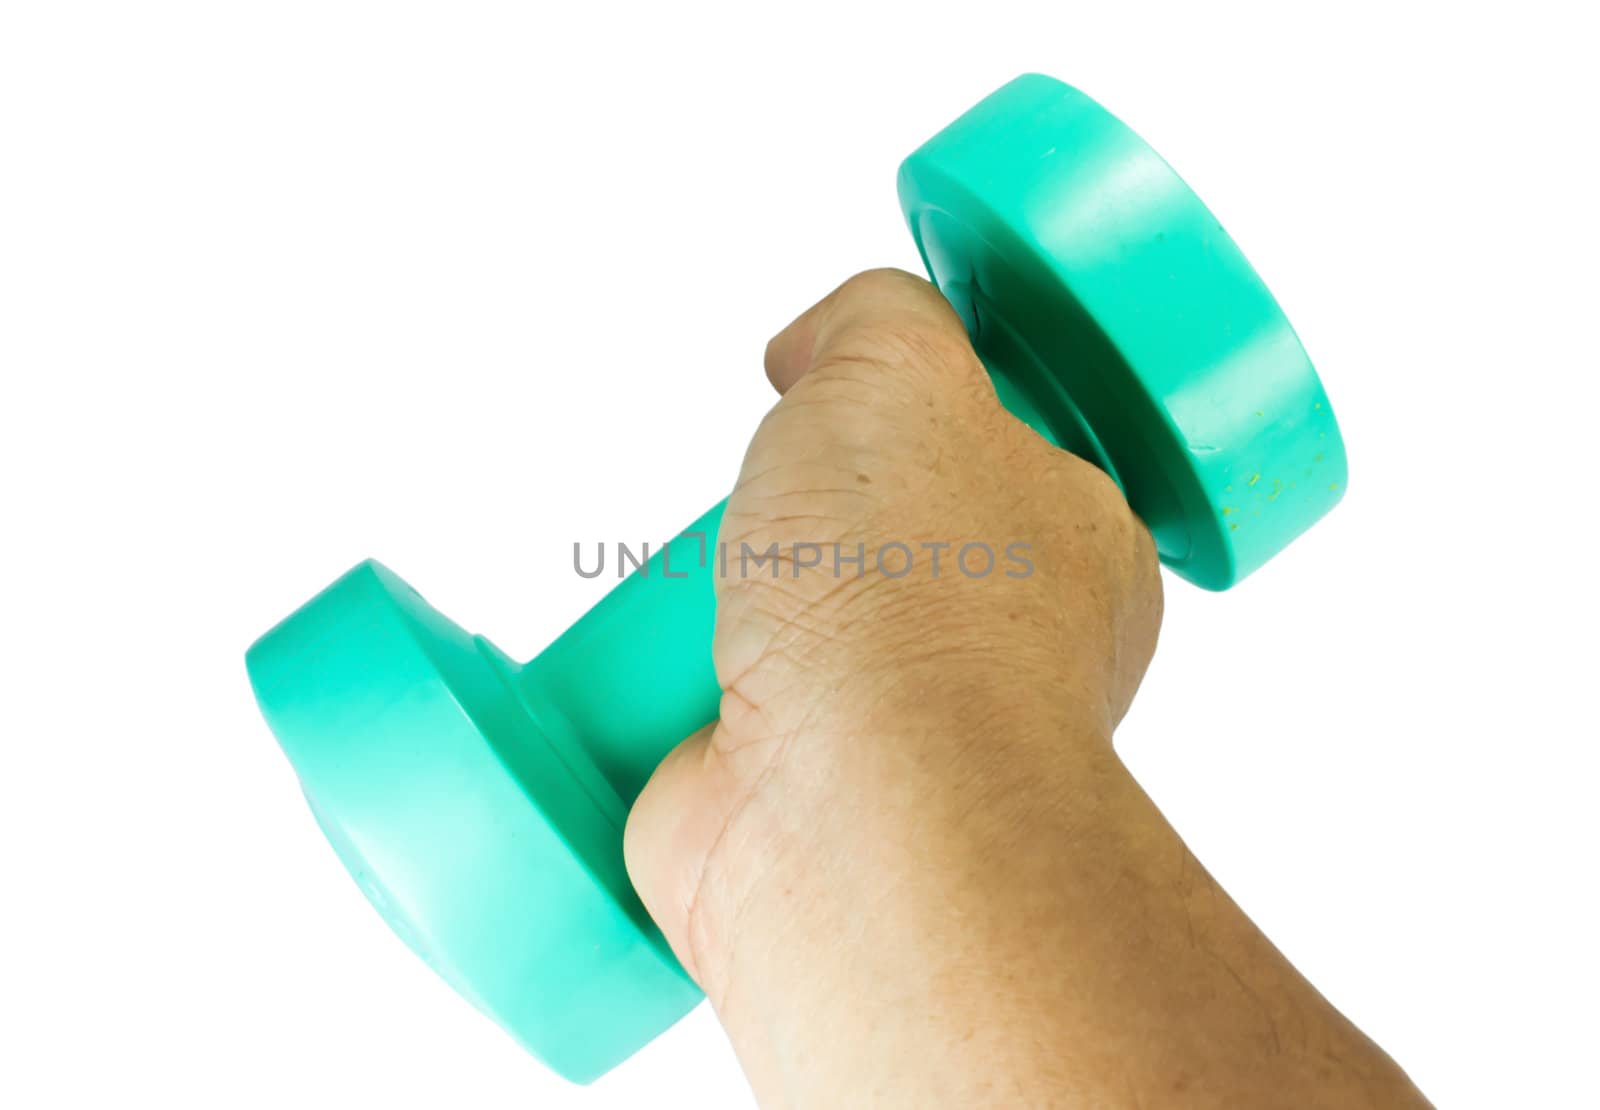 Dumbbell workout is a device used to grip and lift it up.